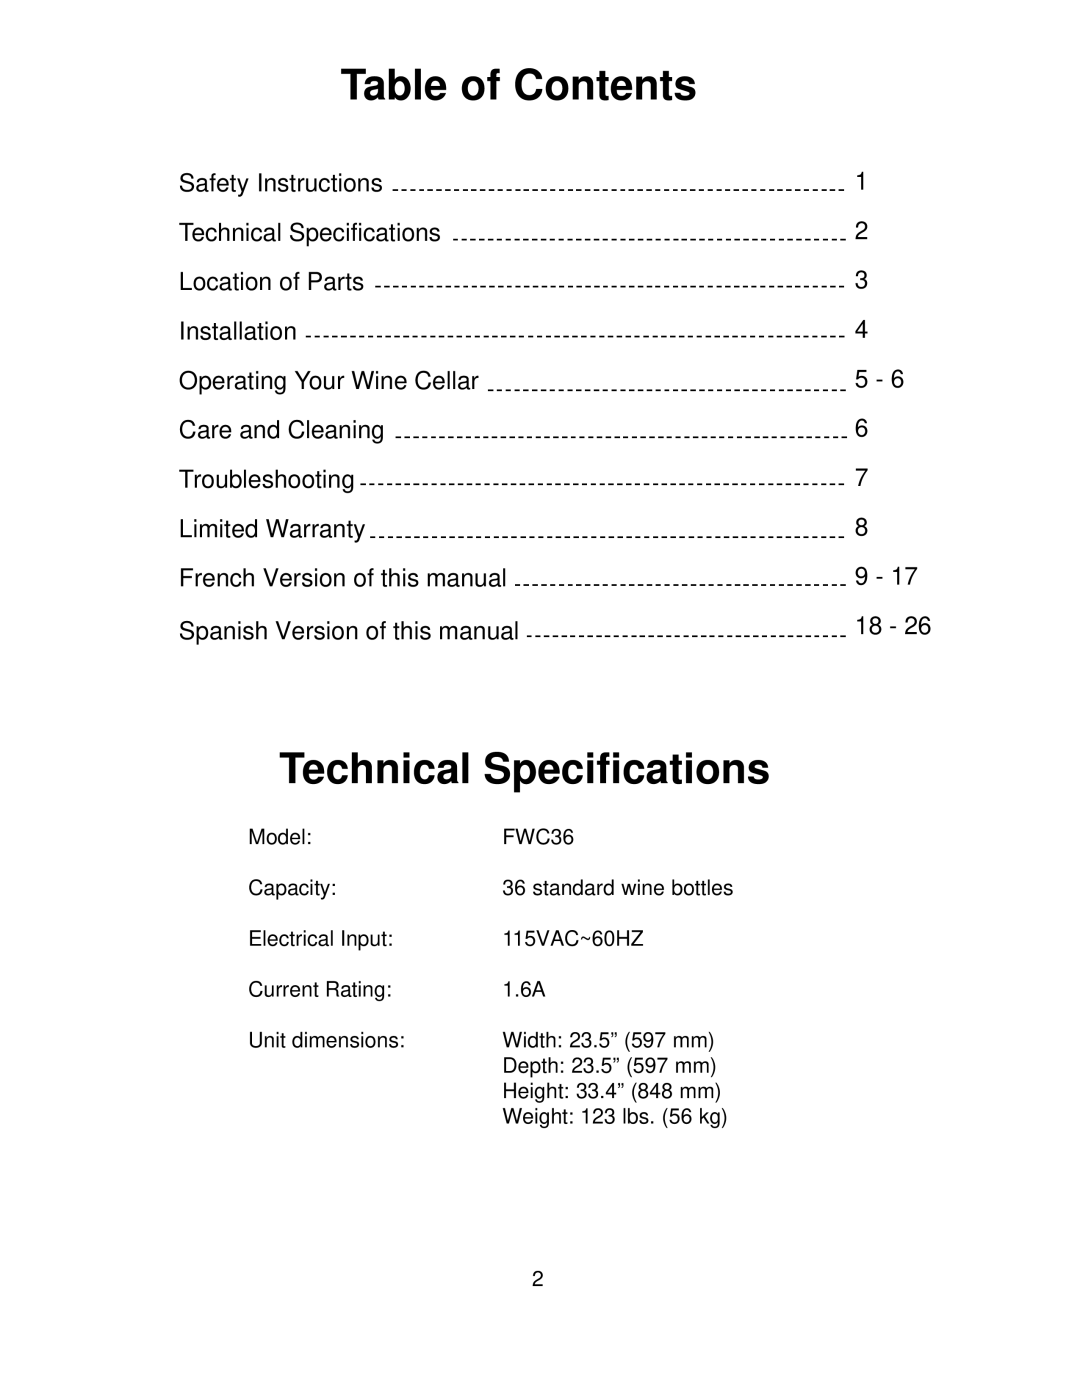 Franklin Industries, L.L.C FWC36 manual Table of Contents, Technical Specifications 